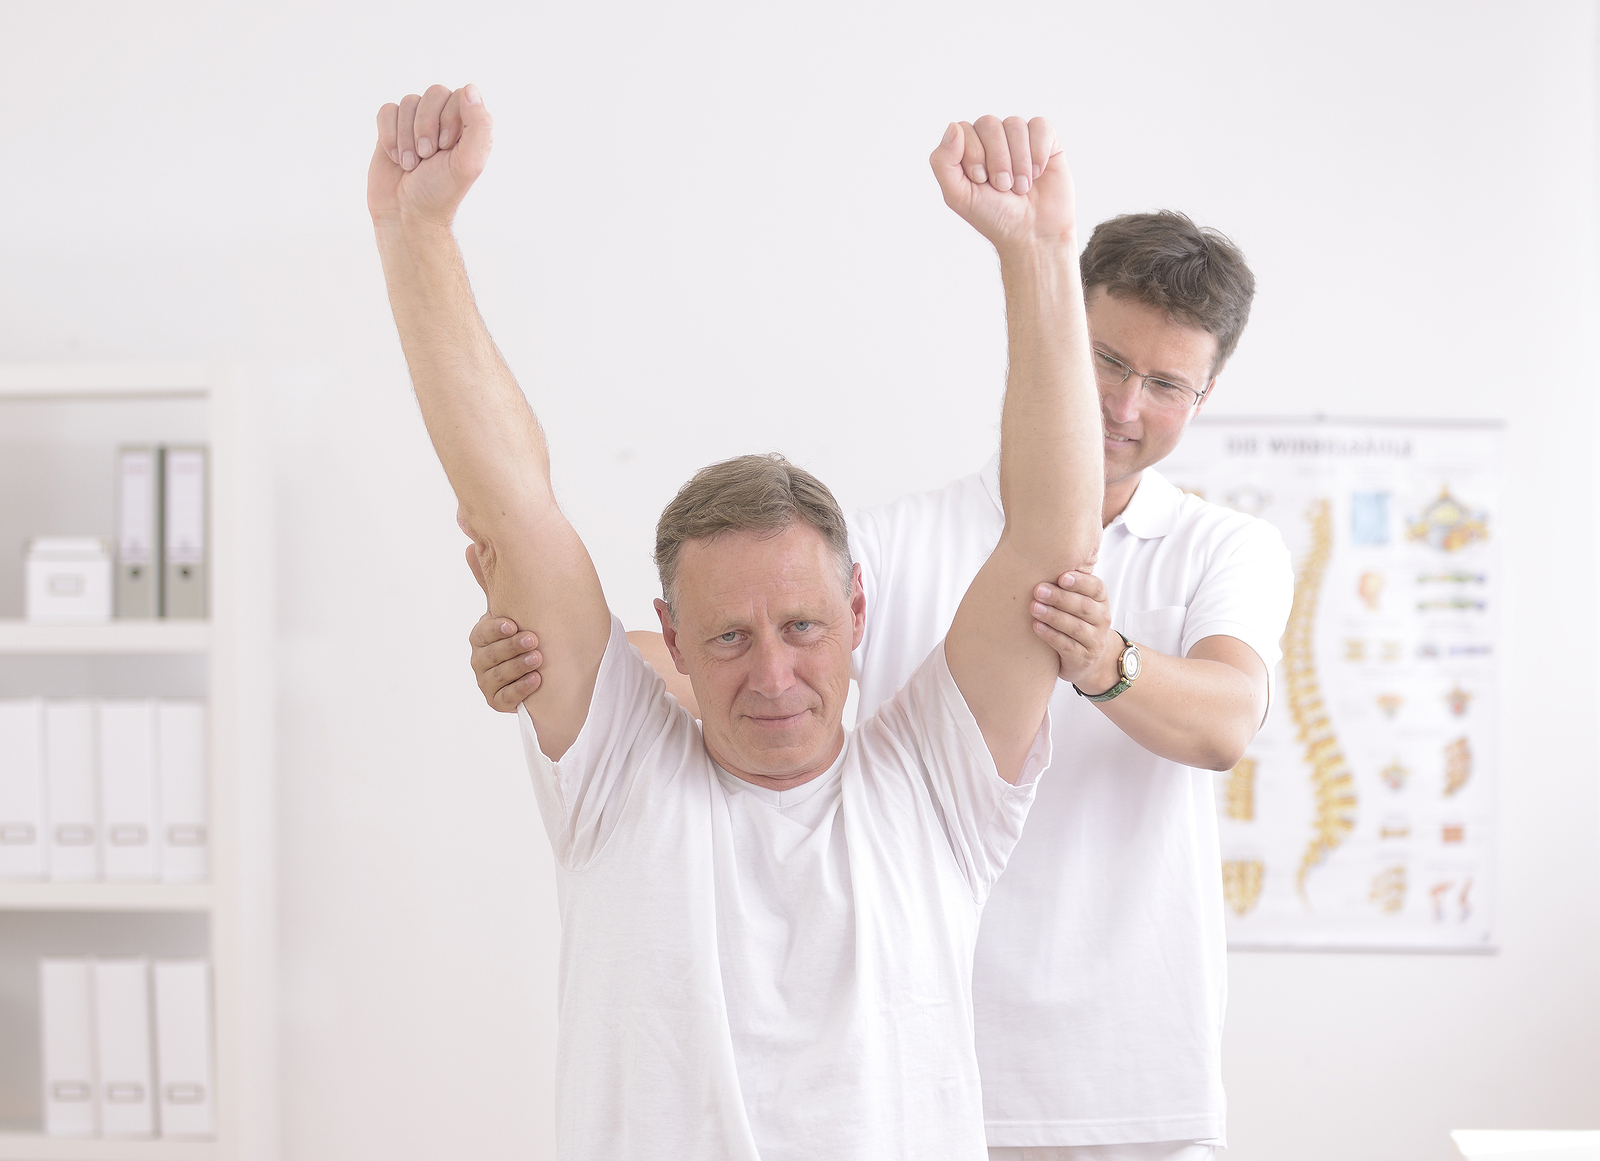 Atlantic Chiropractic Center, Portsmouth chiropractor services: adjustments, injury relief, massage, weight loss, yoga, nutrition & physical therapy